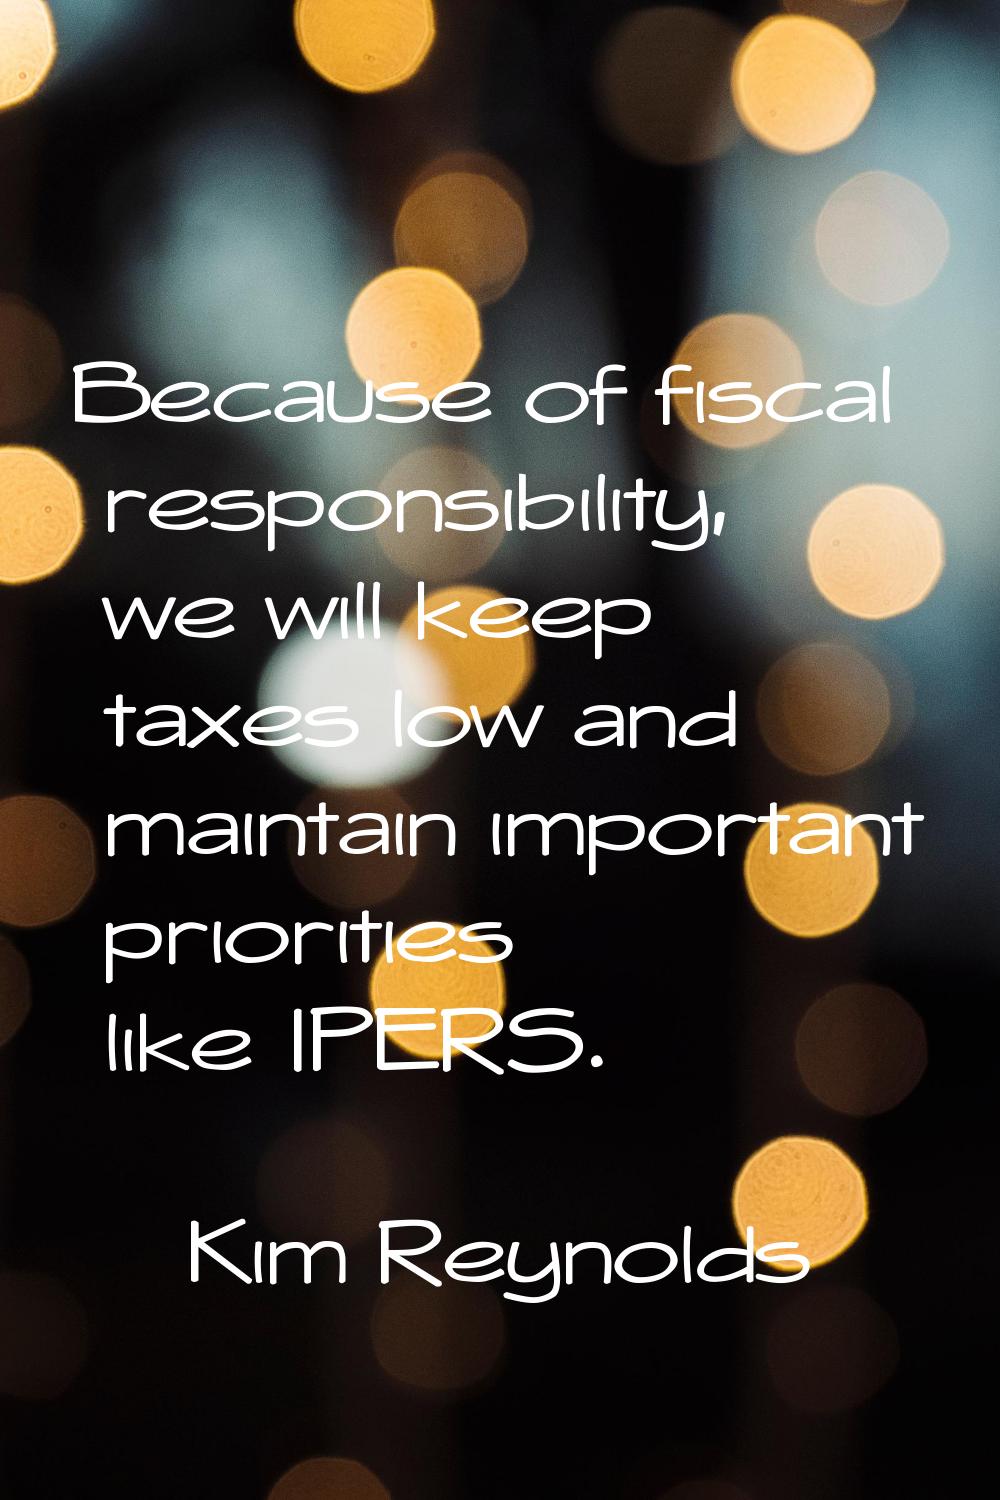 Because of fiscal responsibility, we will keep taxes low and maintain important priorities like IPE